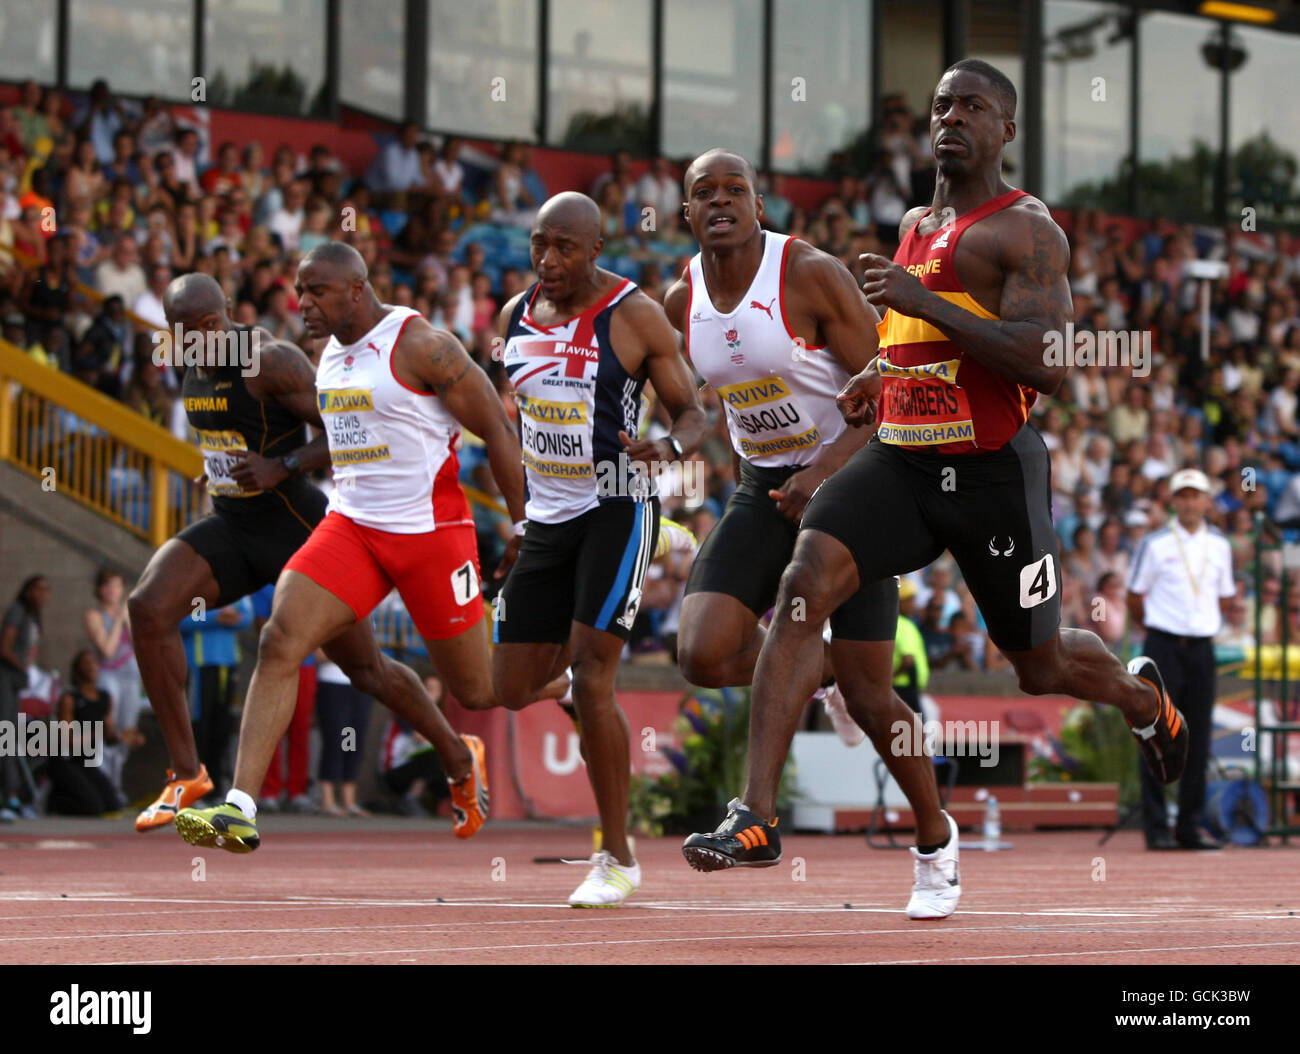 Mark Findlay, Mark Lewis Francis, Marlon Devonish, James Dasaolu and Dwain Chambers (left to right) compete in the men's 100m final during the Aviva European Trials and UK Championships at the Alexander Stadium, Birmingham. Stock Photo